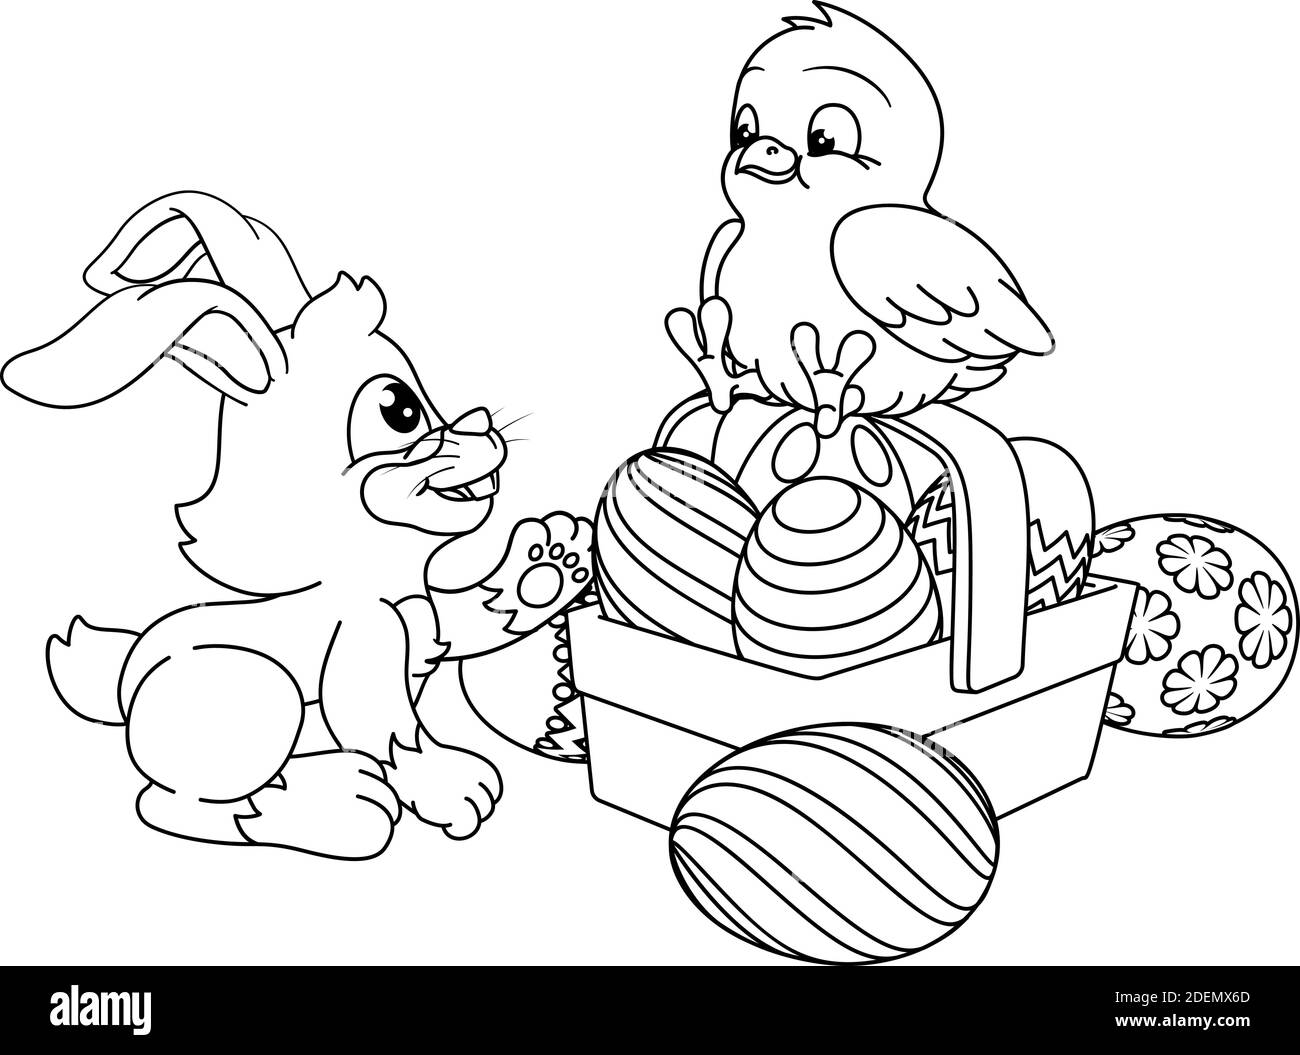 Easter Eggs Bunny and Chick Coloring Book Cartoon Stock Vector